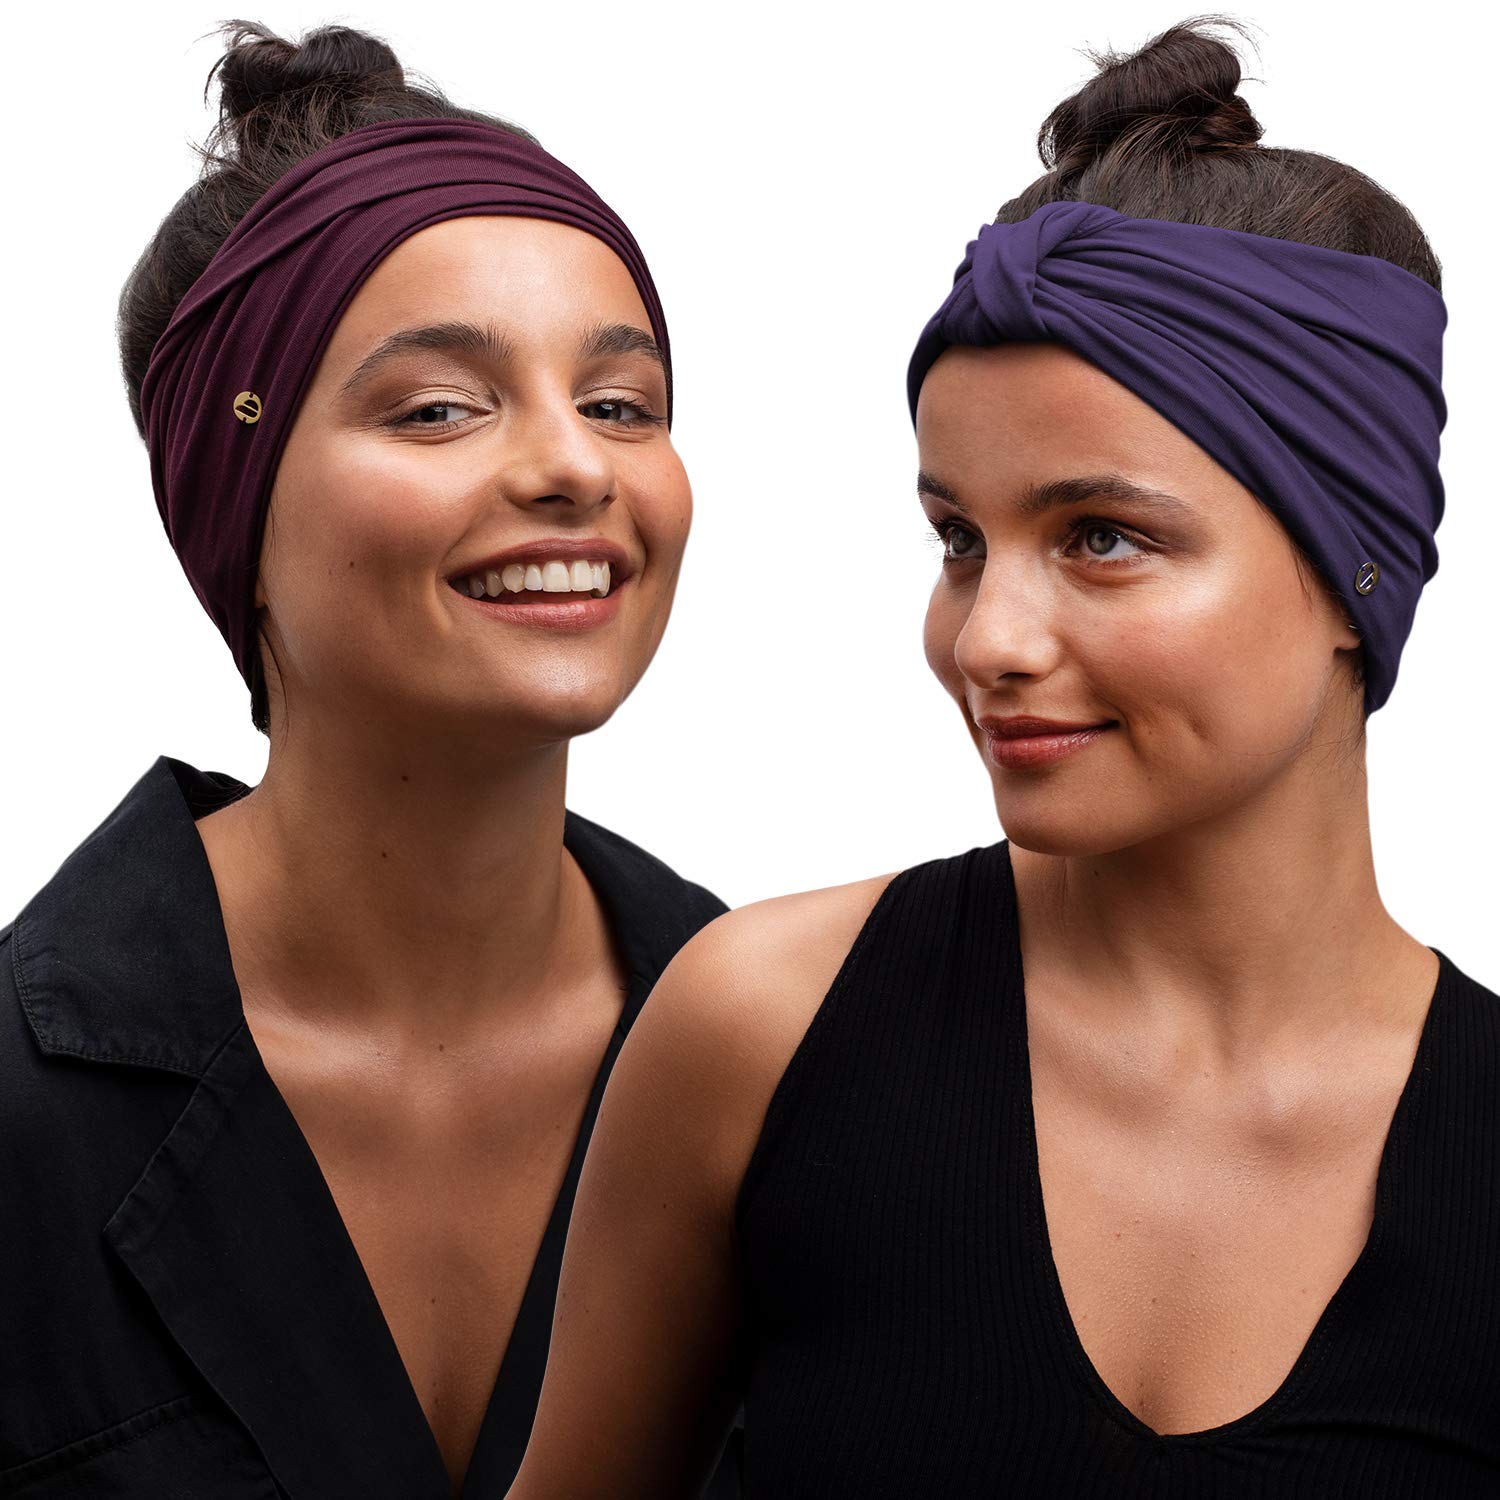 BLOM Original Boho 2-Pack Headbands for Women - Non Slip Knotted Headband -  Women Hair Band Made in Bali - 6 Wide Multistyle Elastic Head Wrap Perfect  for Running, Yoga, Travel, Workouts